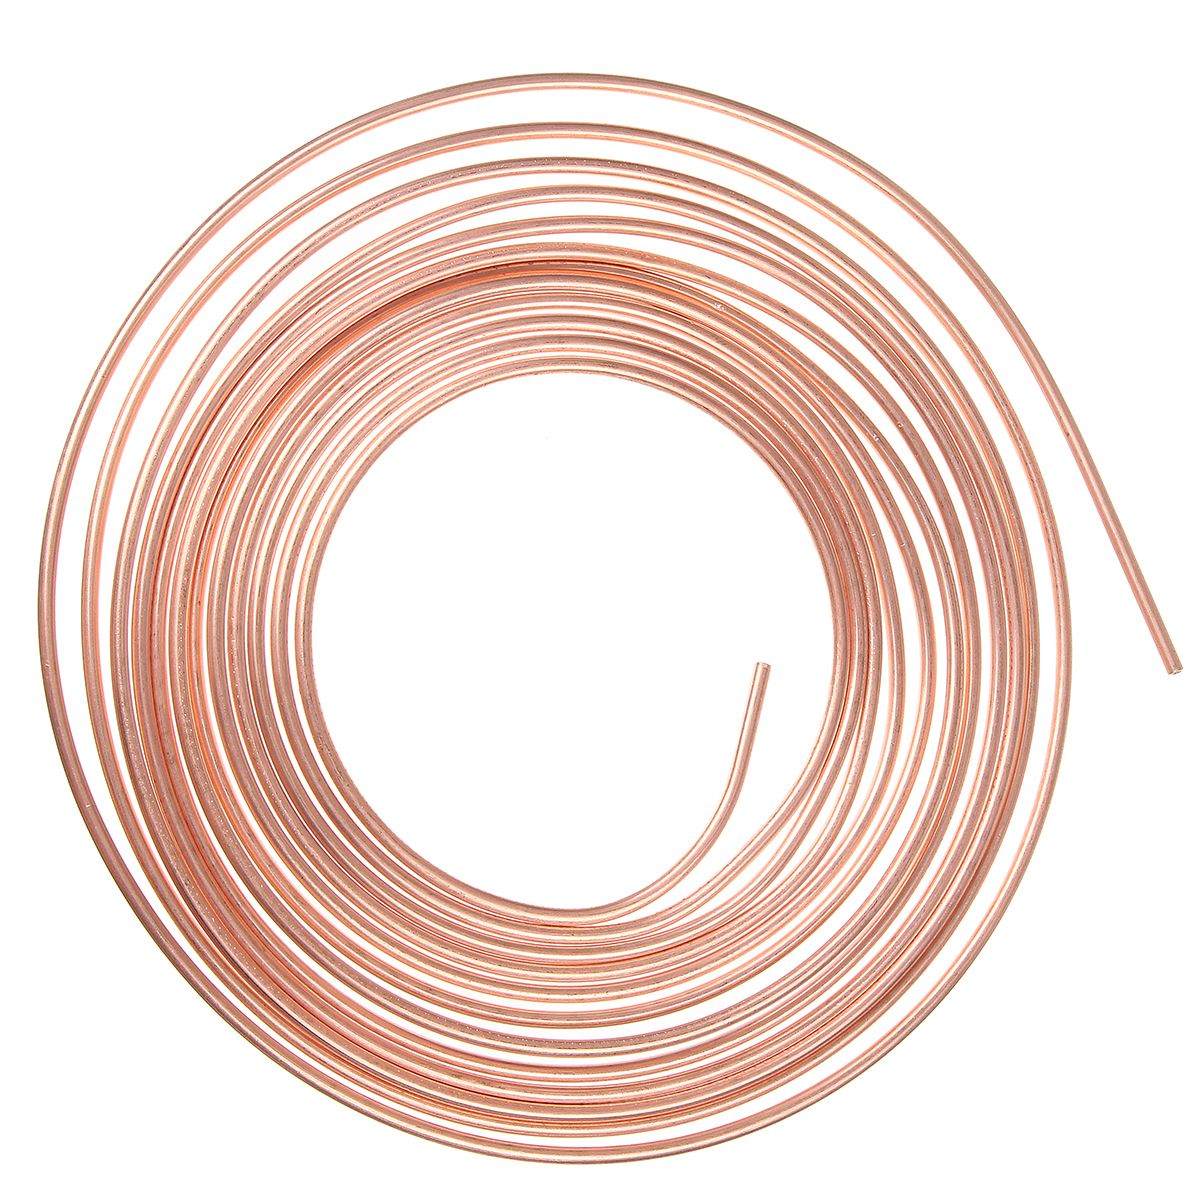 25ft-Copper-Brake-Line-Pipe-Hose-Kit-10-Male-amp-10-Female-Nuts-Joiner-Joint-316-Union-1543210